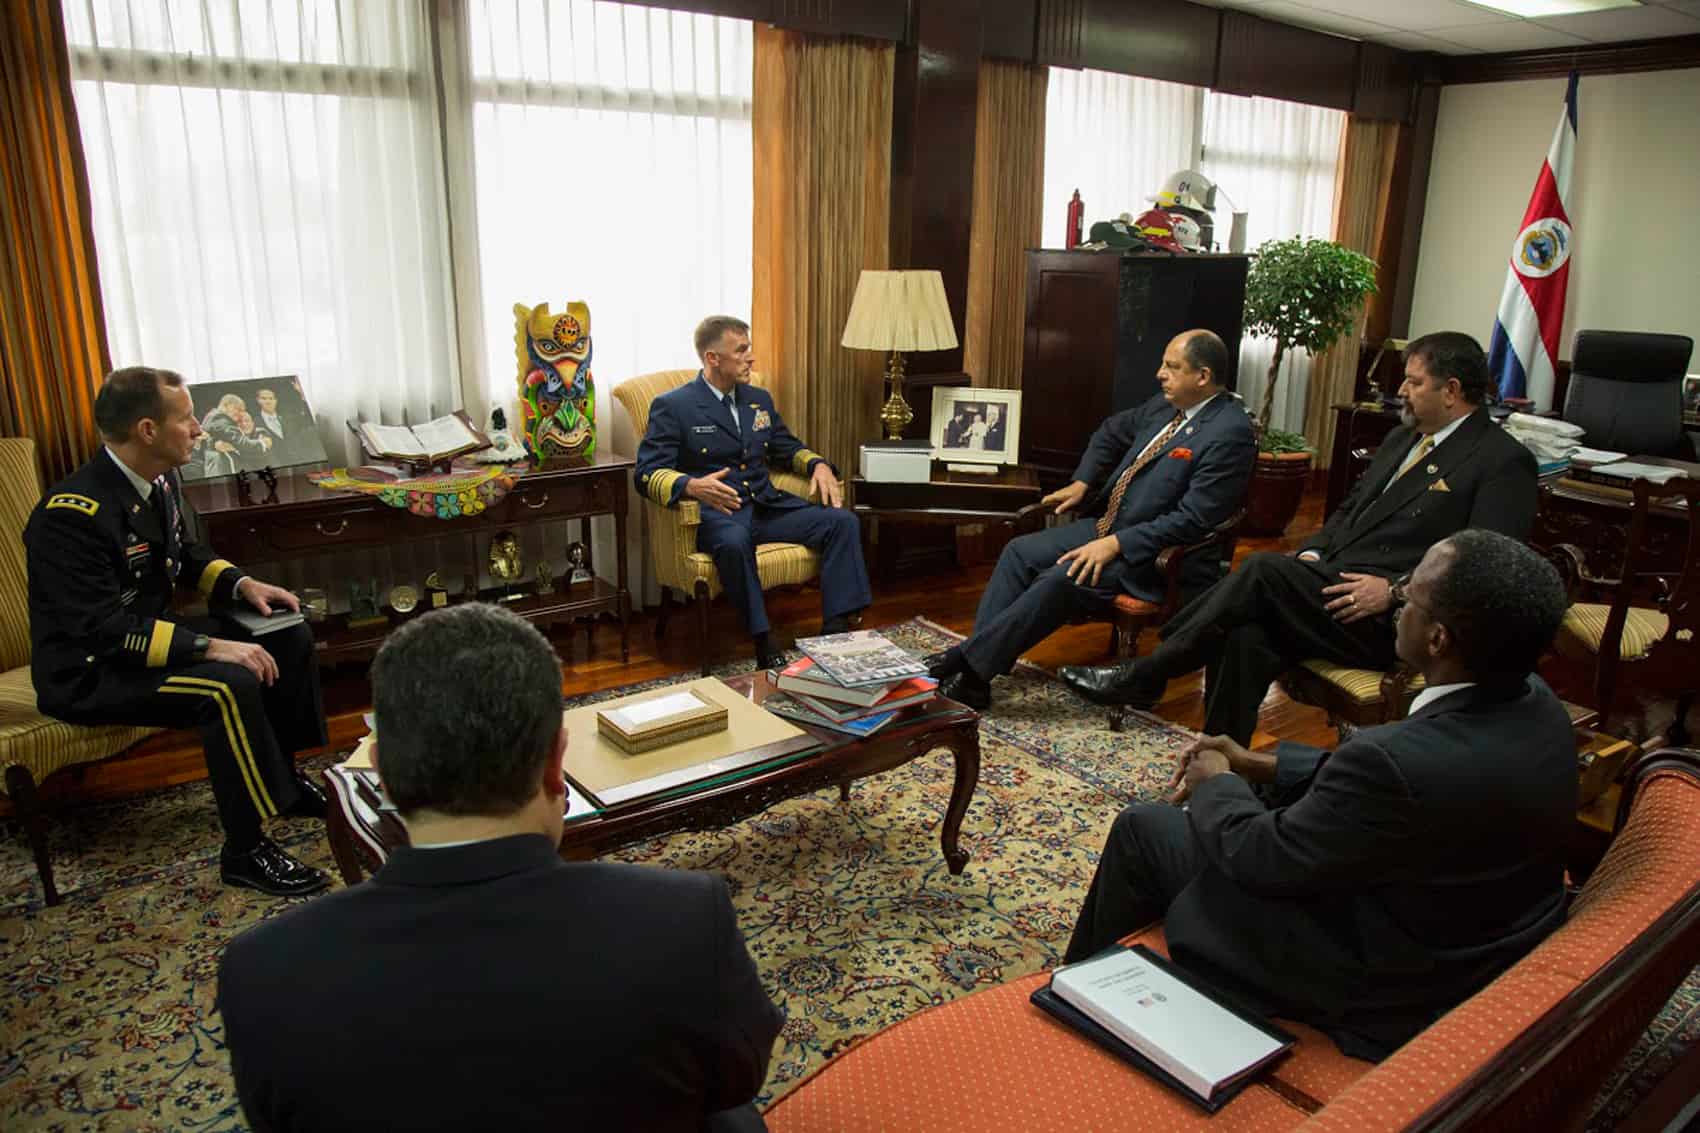 President Luis Guillermo Solís and U.S. officials